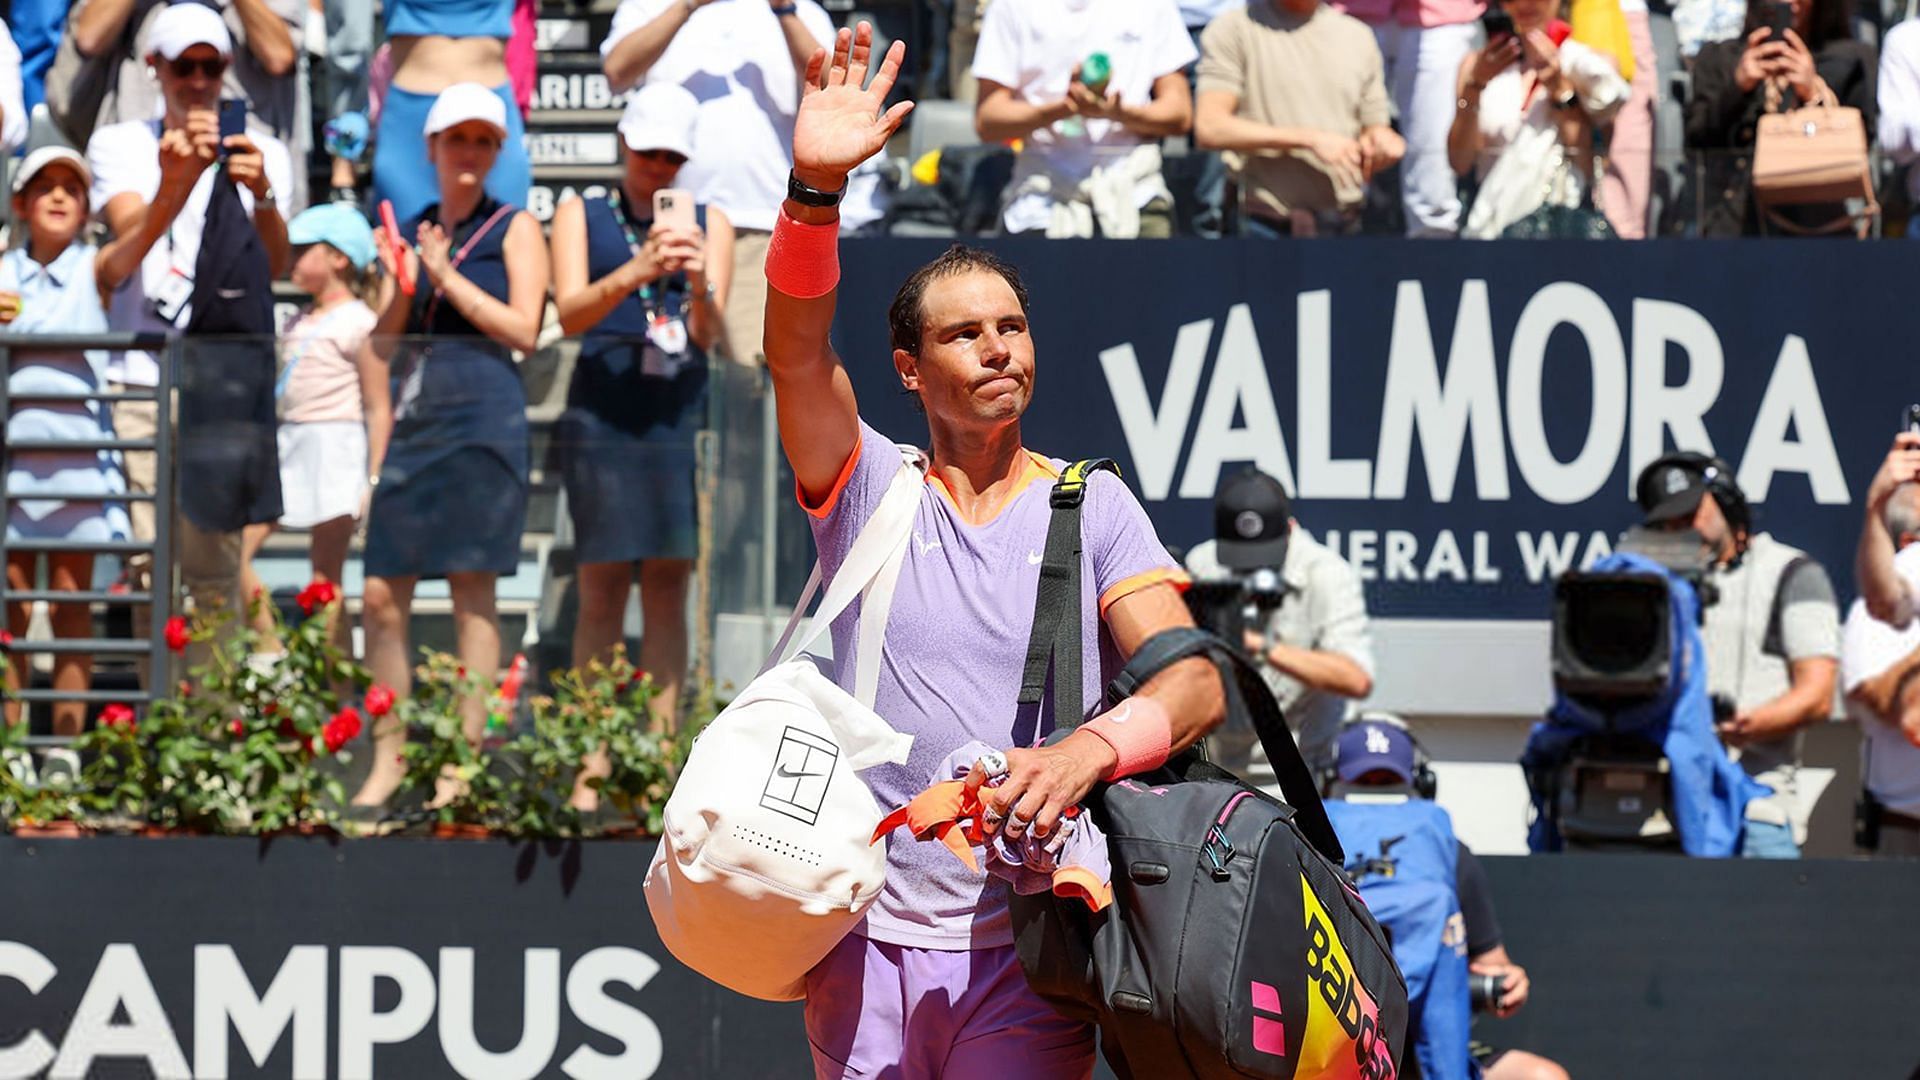 Rafael Nadal was knocked out in the second-round at the Italian Open